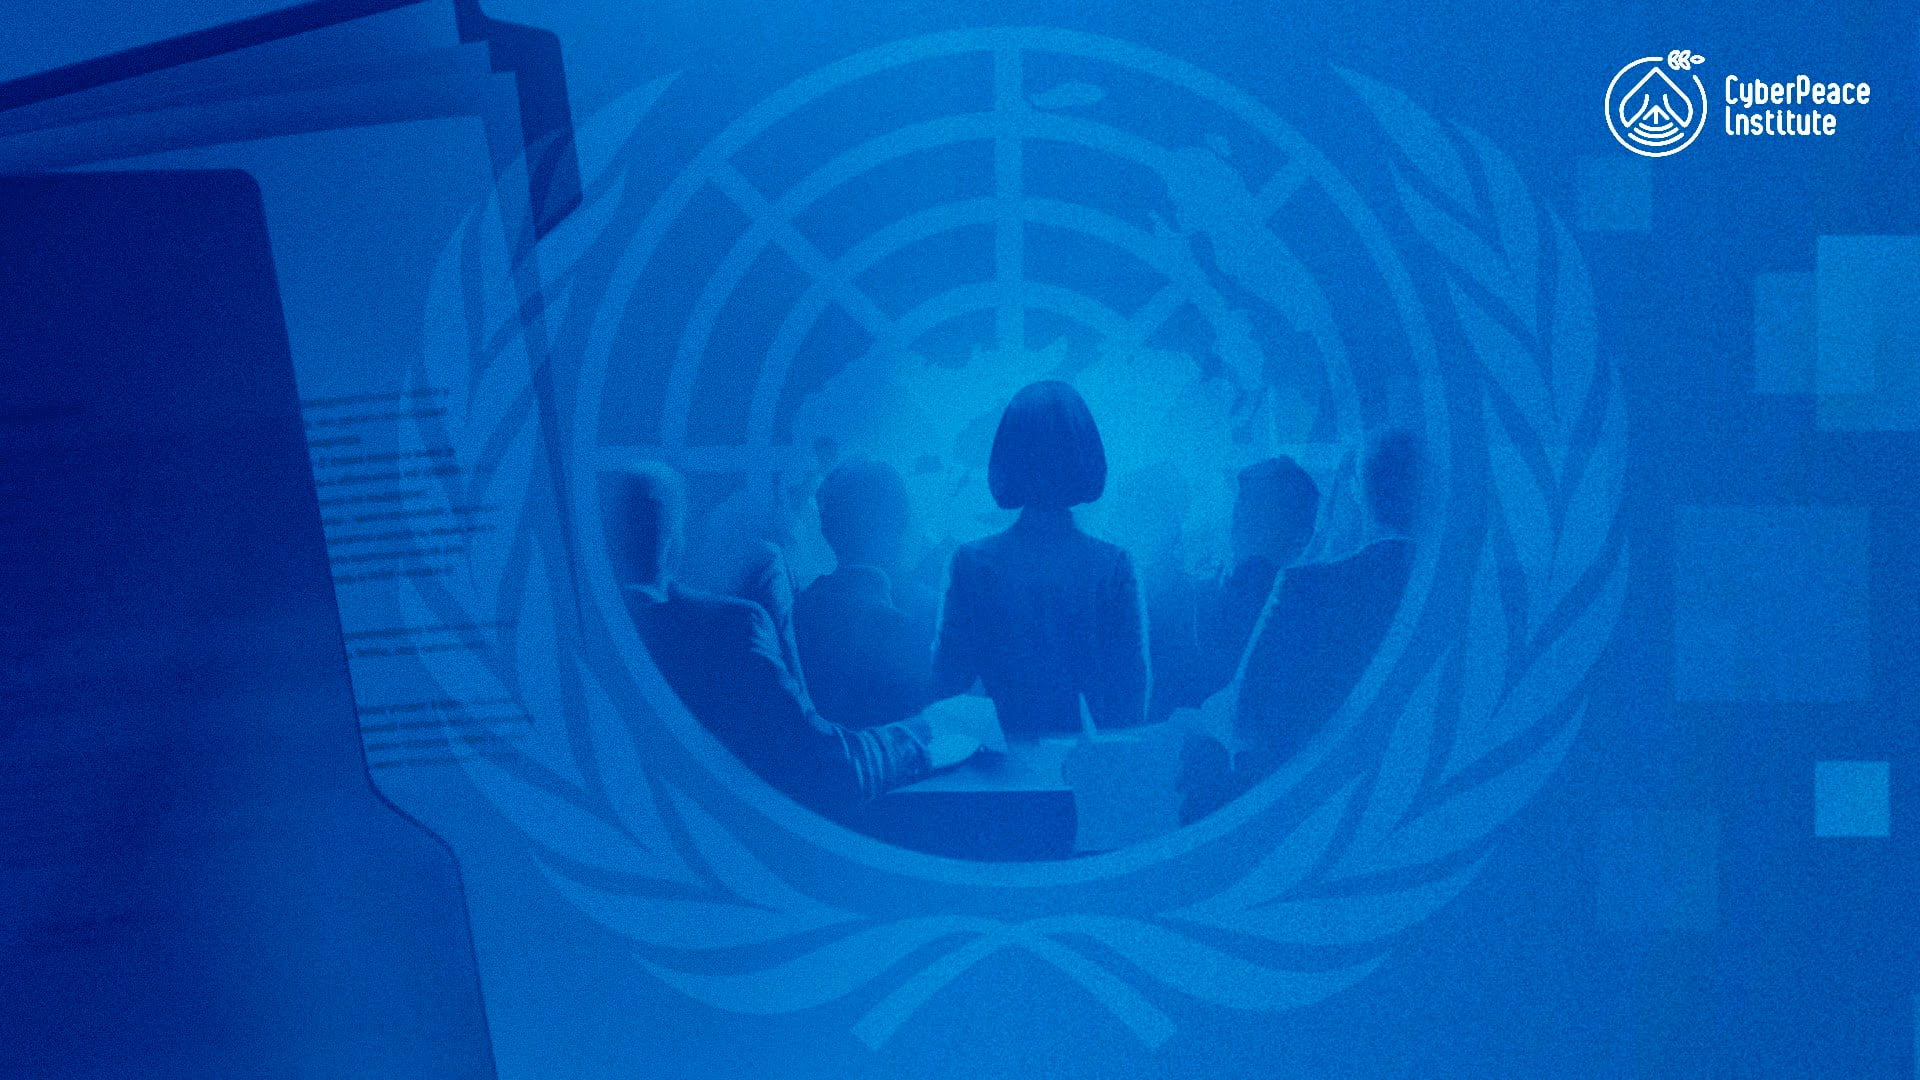 Part 2: Advancing the Implementation of UN Cyber Norms through Multistakeholder action